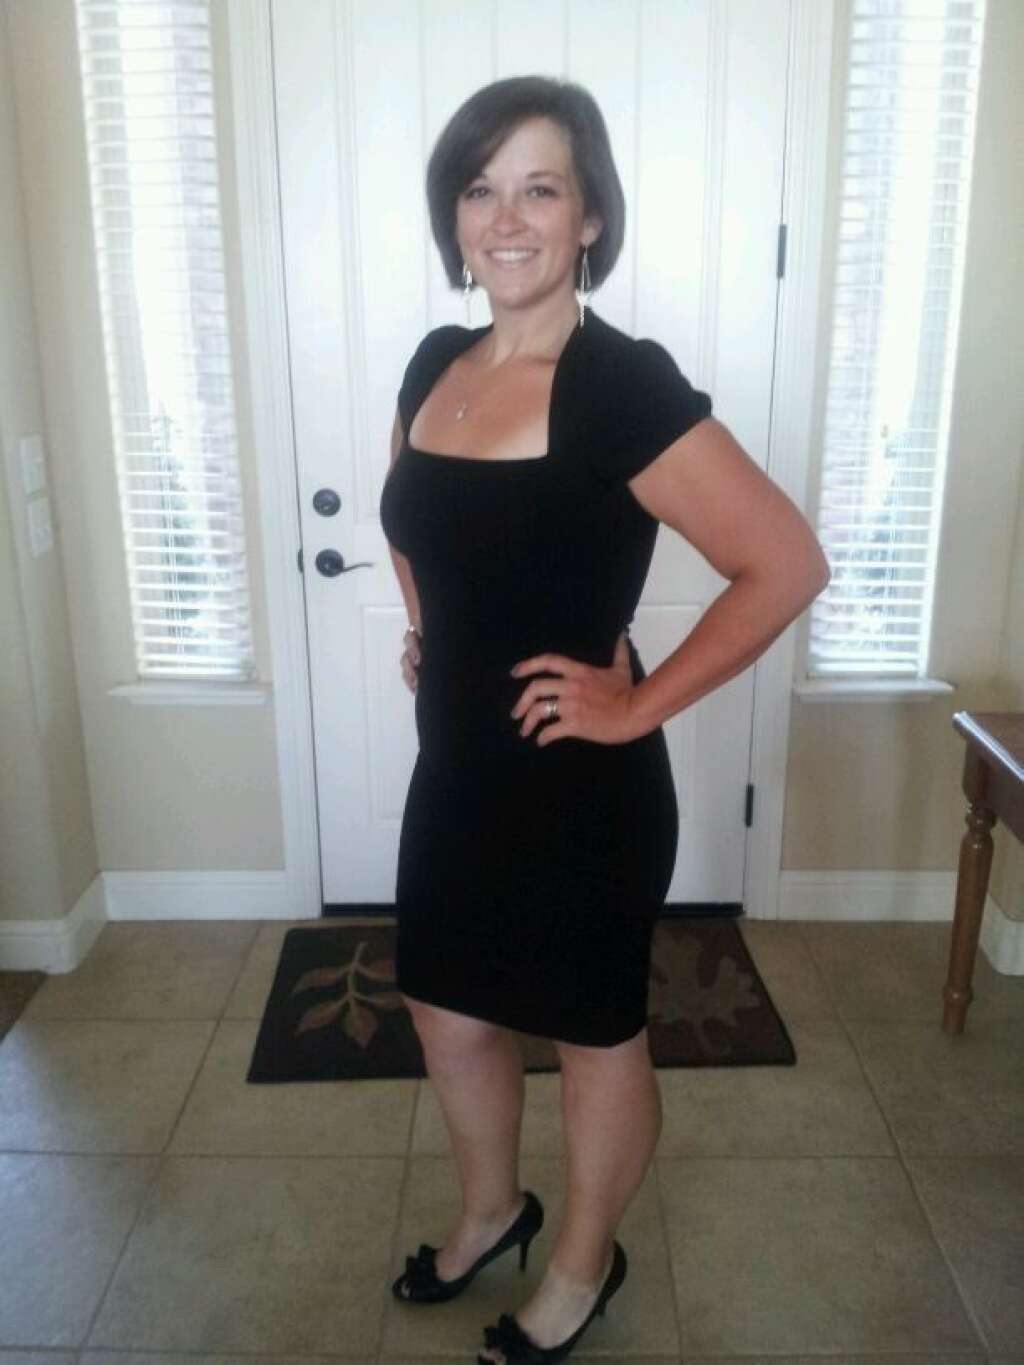 Stephanie AFTER - <a href="http://www.huffingtonpost.com/2012/11/08/i-lost-weight-stephanie-cook_n_2095217.html">Read Stephanie's story here.</a>